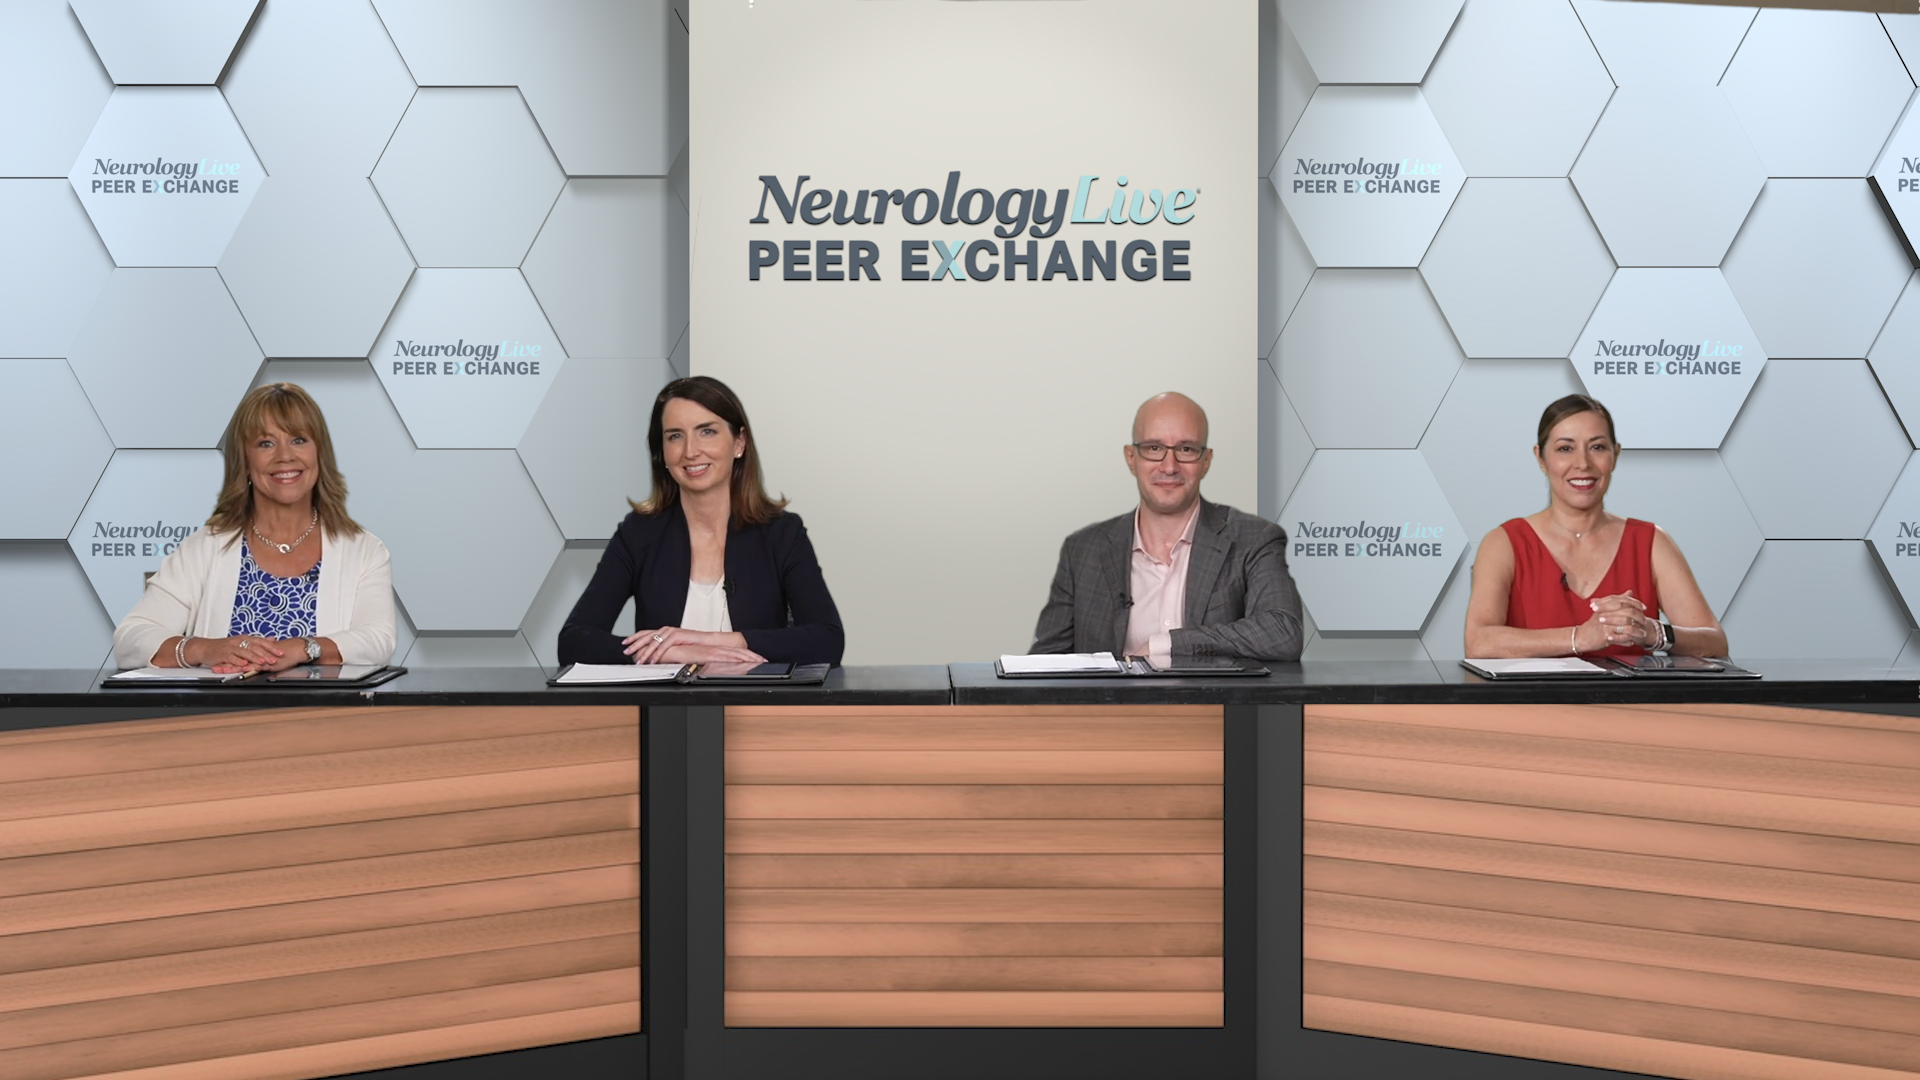 Practice Pearls for the Management of Multiple Sclerosis